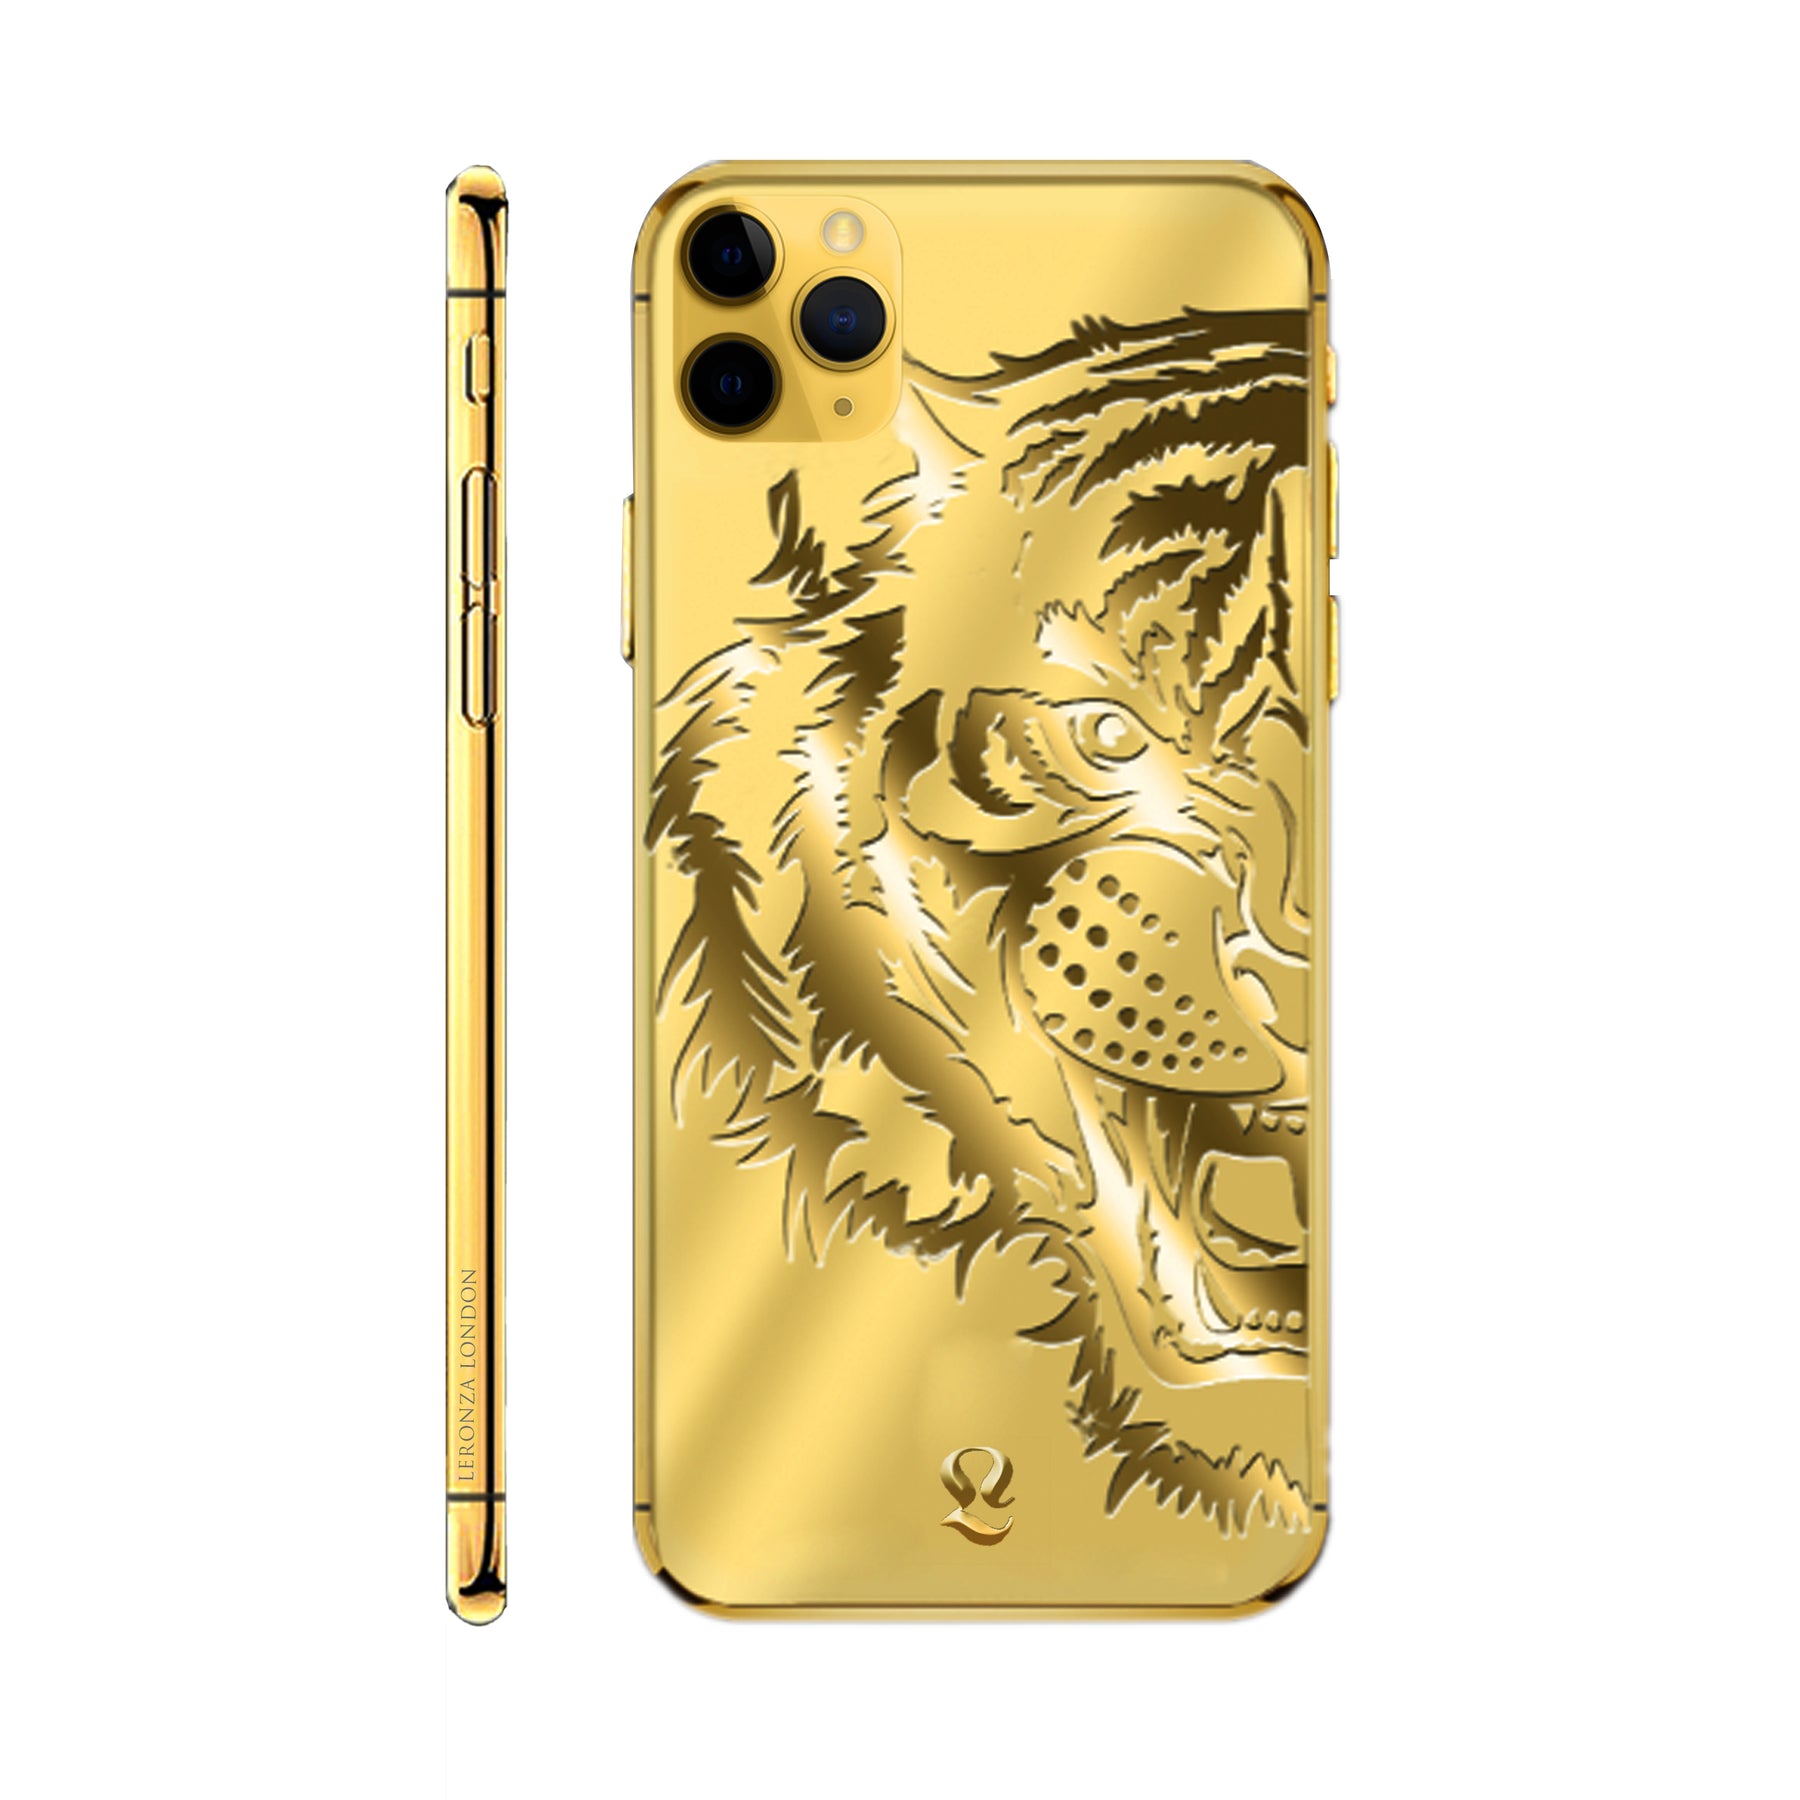 Iphone 11 Pro Max Limited Edition 24k Gold